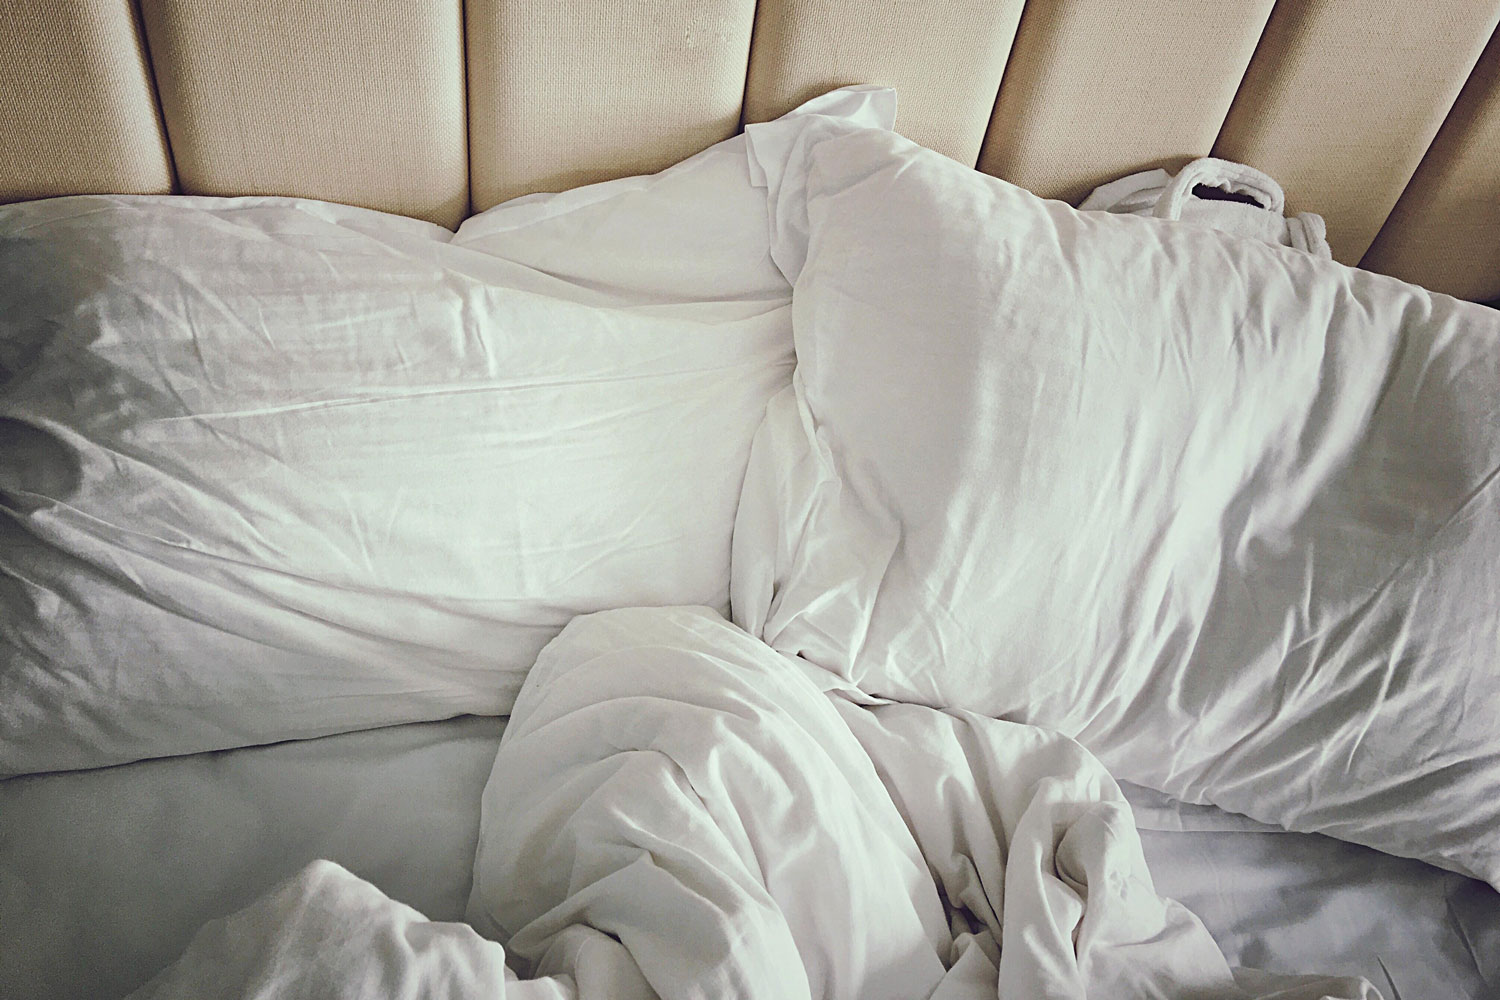 How To Tell If Your Hotel Bed Sheets Have Really Been Cleaned